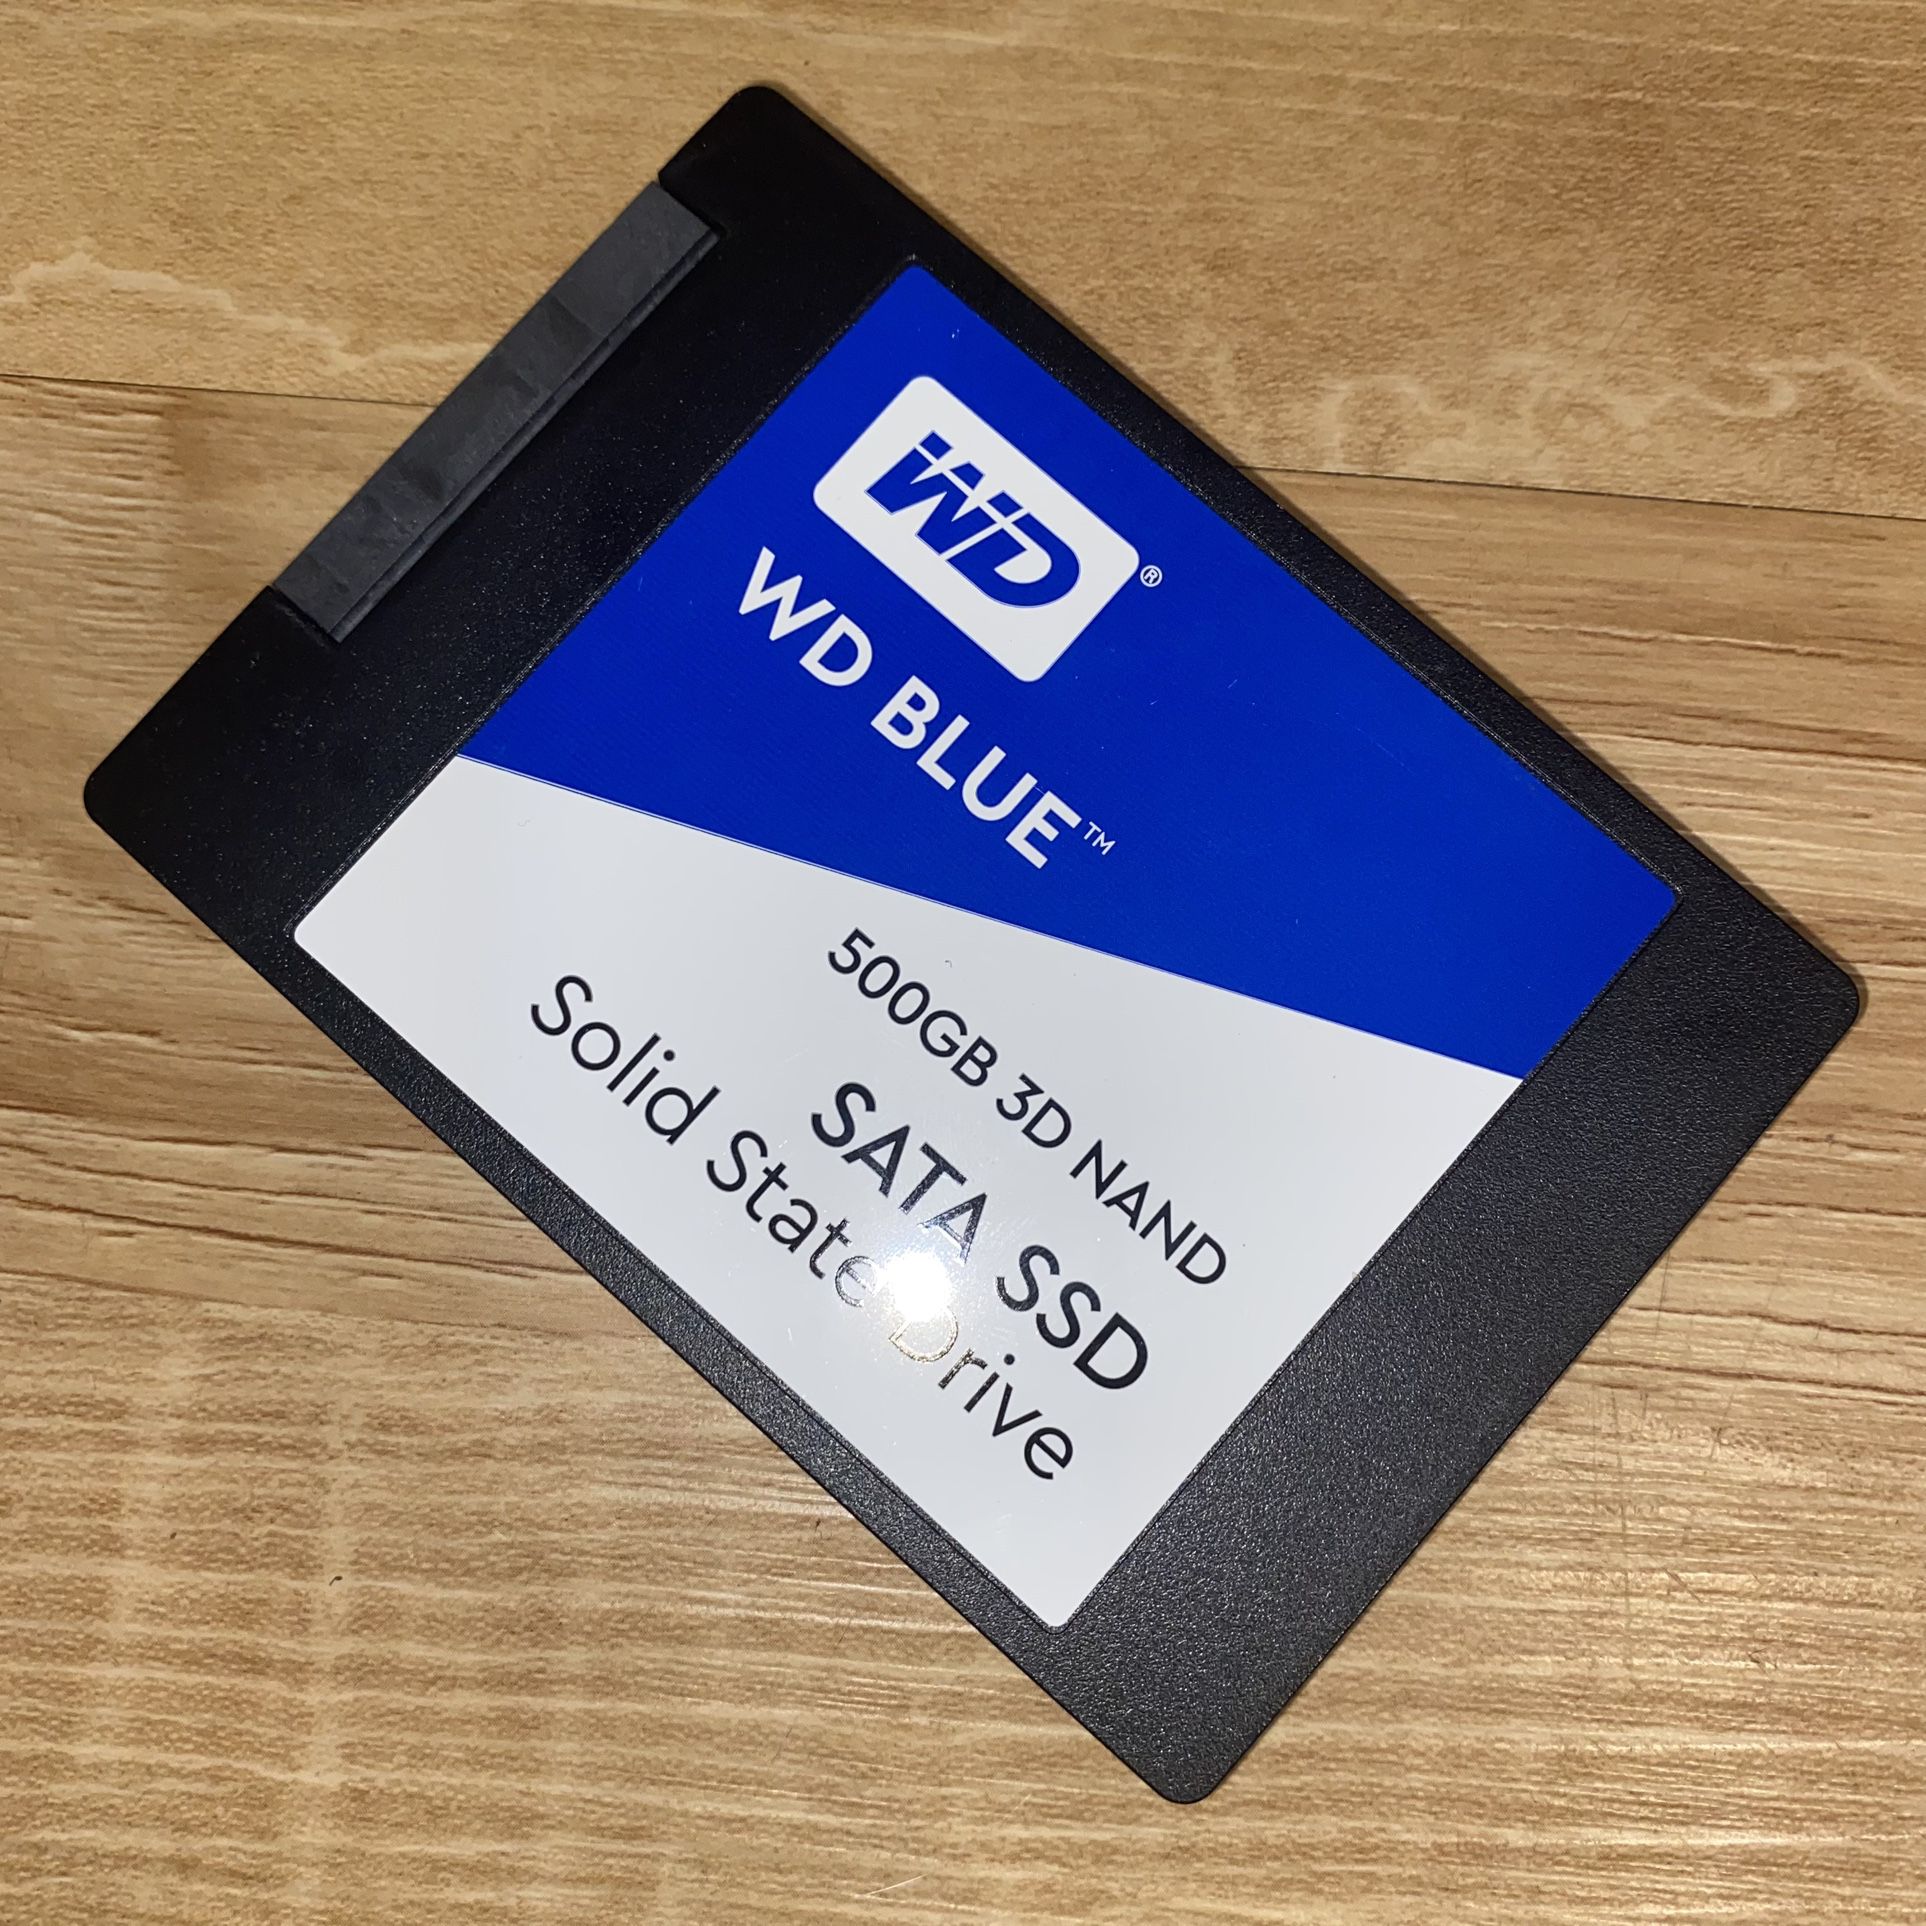 500GB SSD -Tested- WD Blue